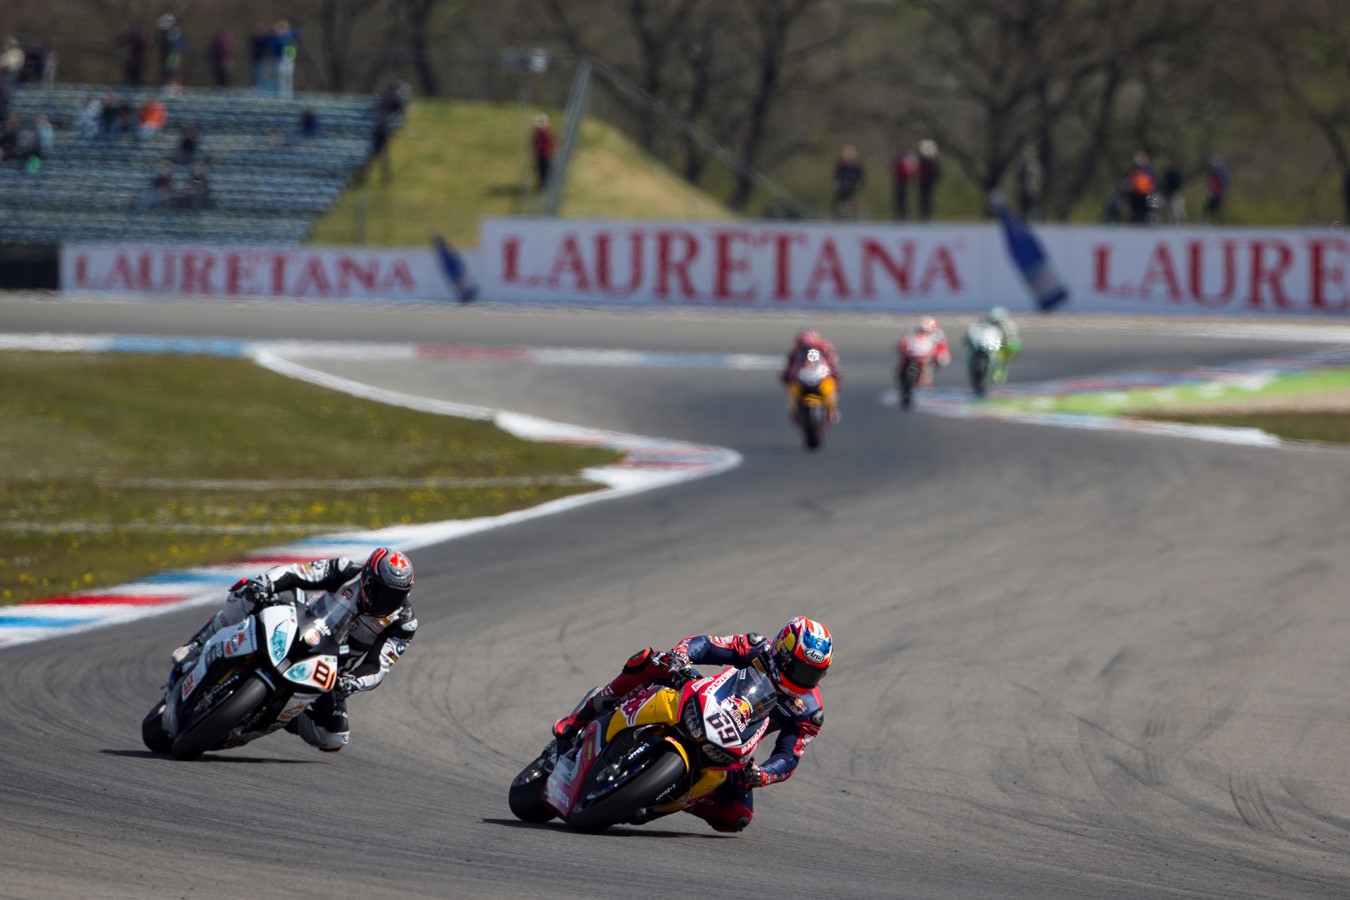 Hayden and Bradl round out top-10 in closing race of Dutch Round